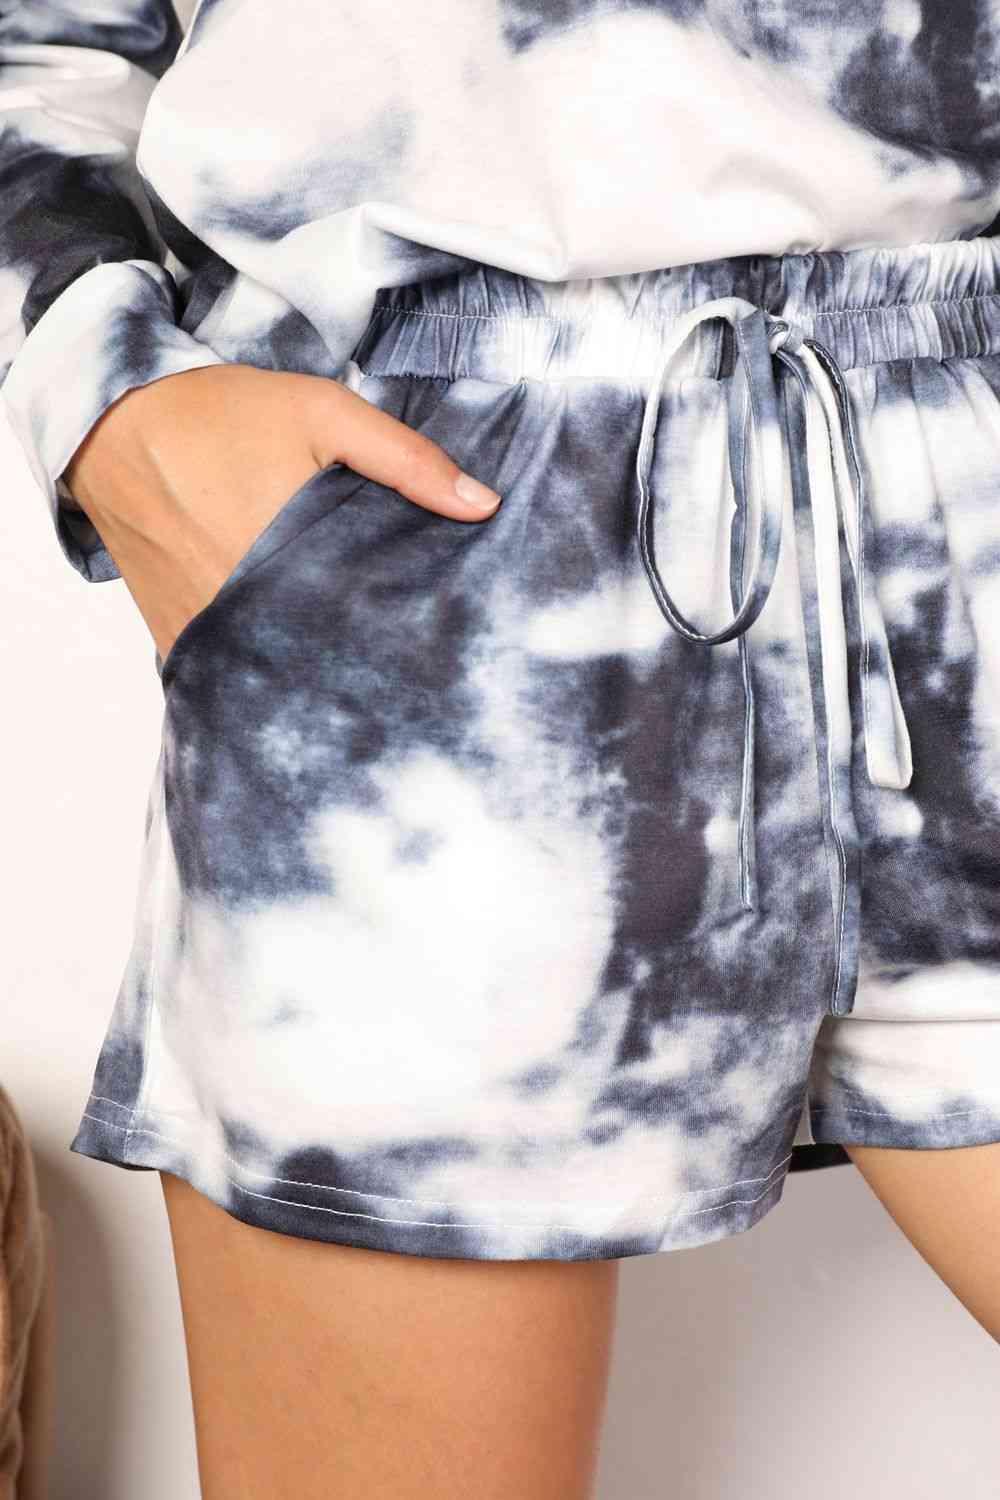 Tie-Dye Round Neck Top and Shorts Lounge Set - Kawaii Stop - Black Friday, Casual Chic, Double Take, Dropped Shoulders, Hand Washable, Mix and Match, Playful Patterns, Round Neck Top, Ship from USA, Stylish Relaxation, Tie-Dye Lounge Set, Trendy Loungewear, Versatile Wardrobe Addition, Vibrant Comfort